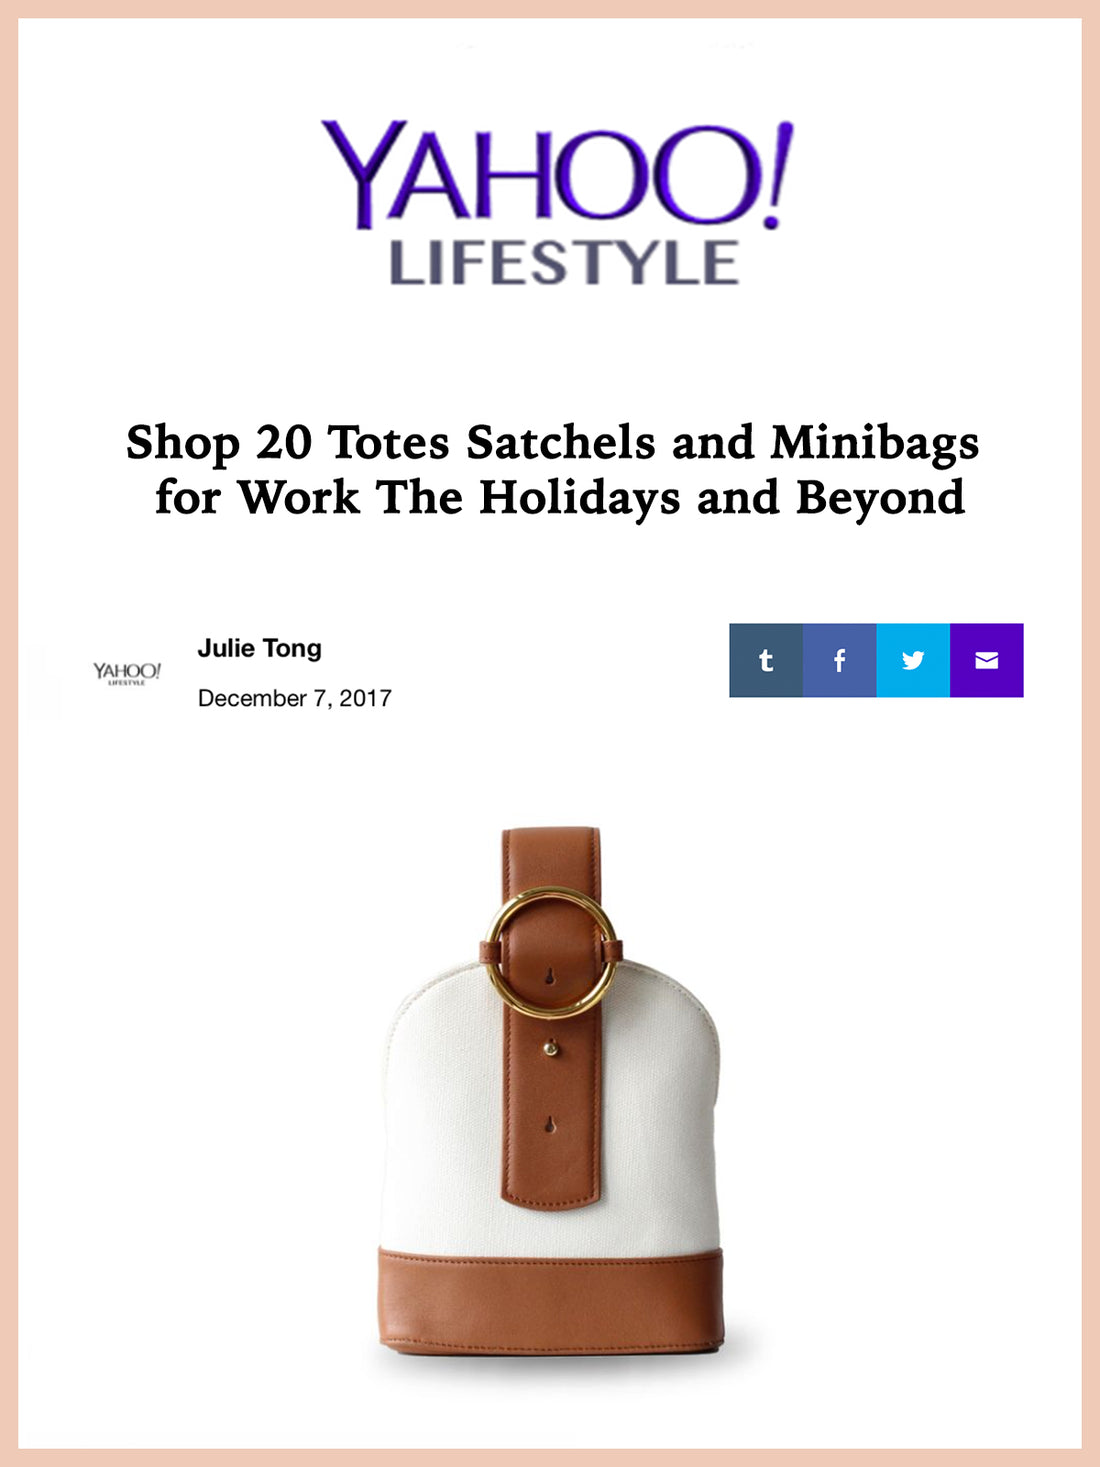 YAHOO, Shop 20 Totes Satchels and Minibags for Work The holidays and Beyond